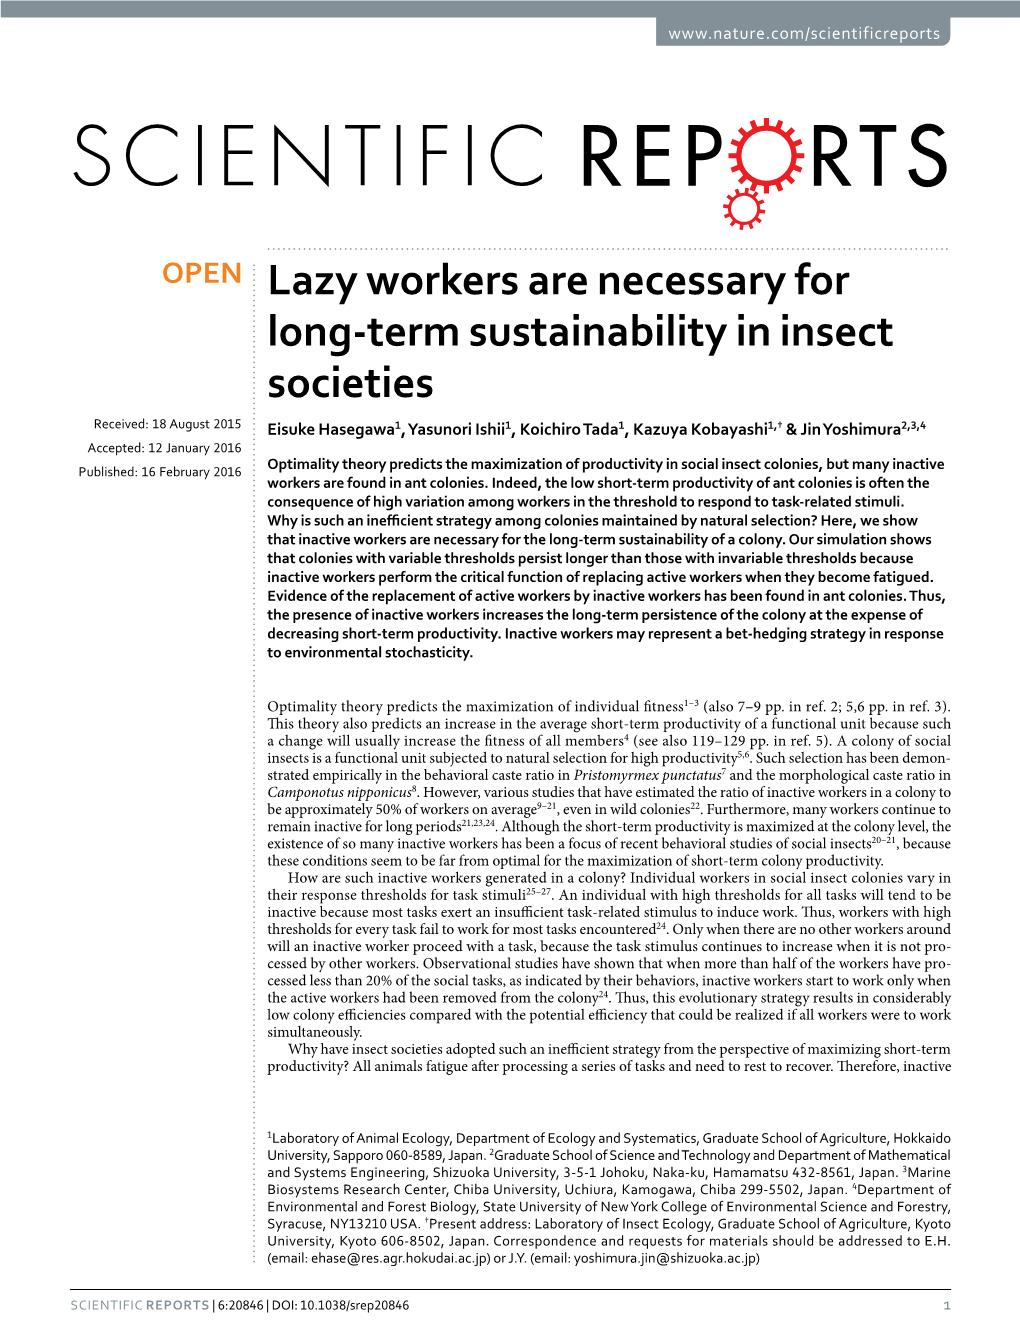 Lazy Workers Are Necessary for Long-Term Sustainability in Insect